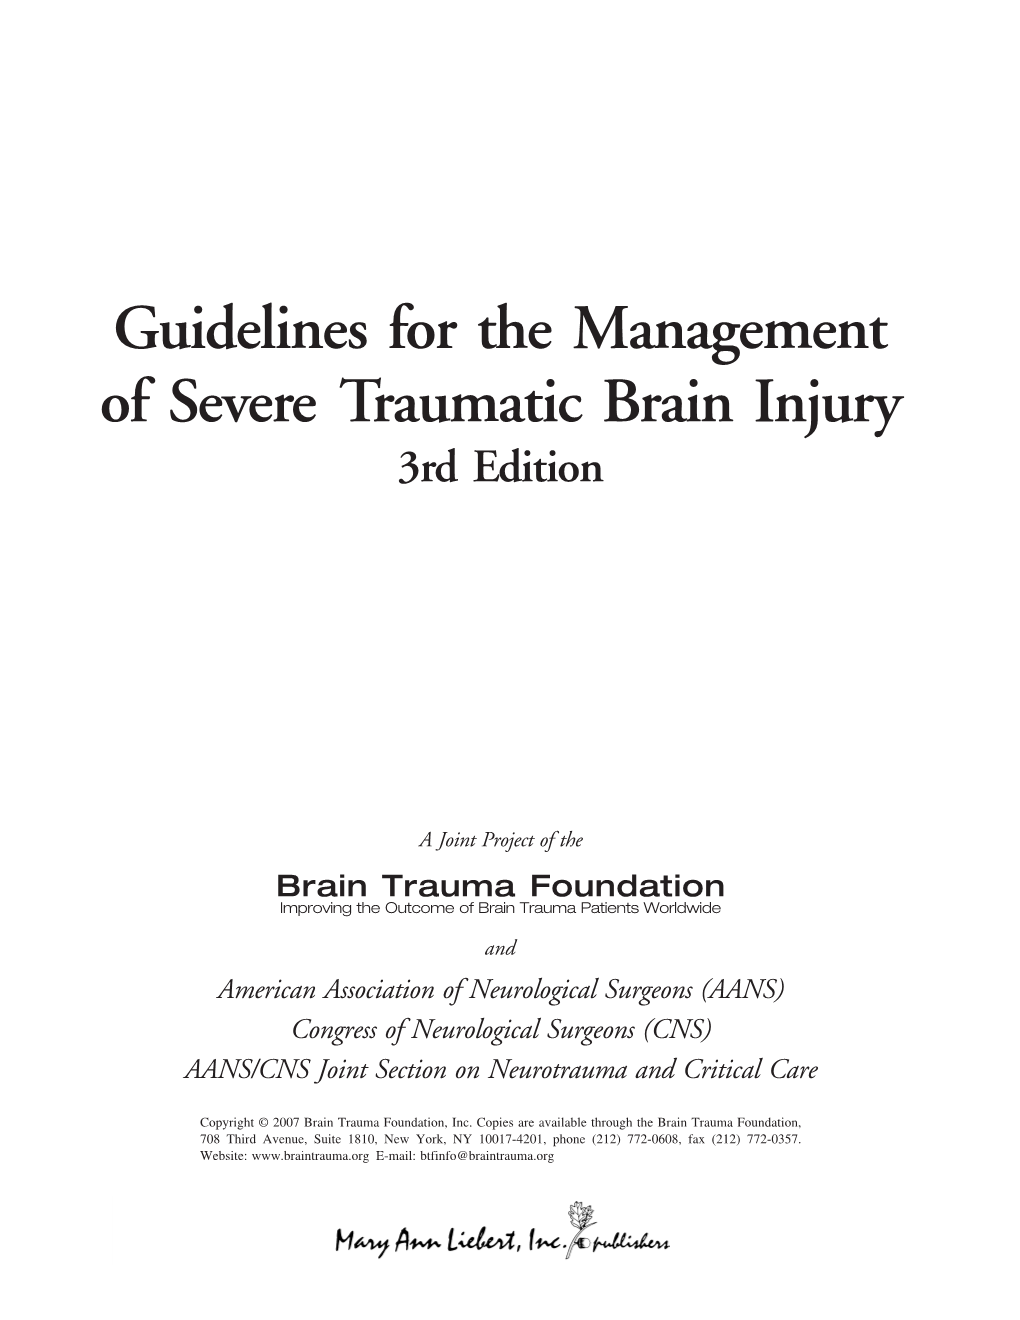 Guidelines for the Management of Severe Traumatic Brain Injury 3Rd Edition